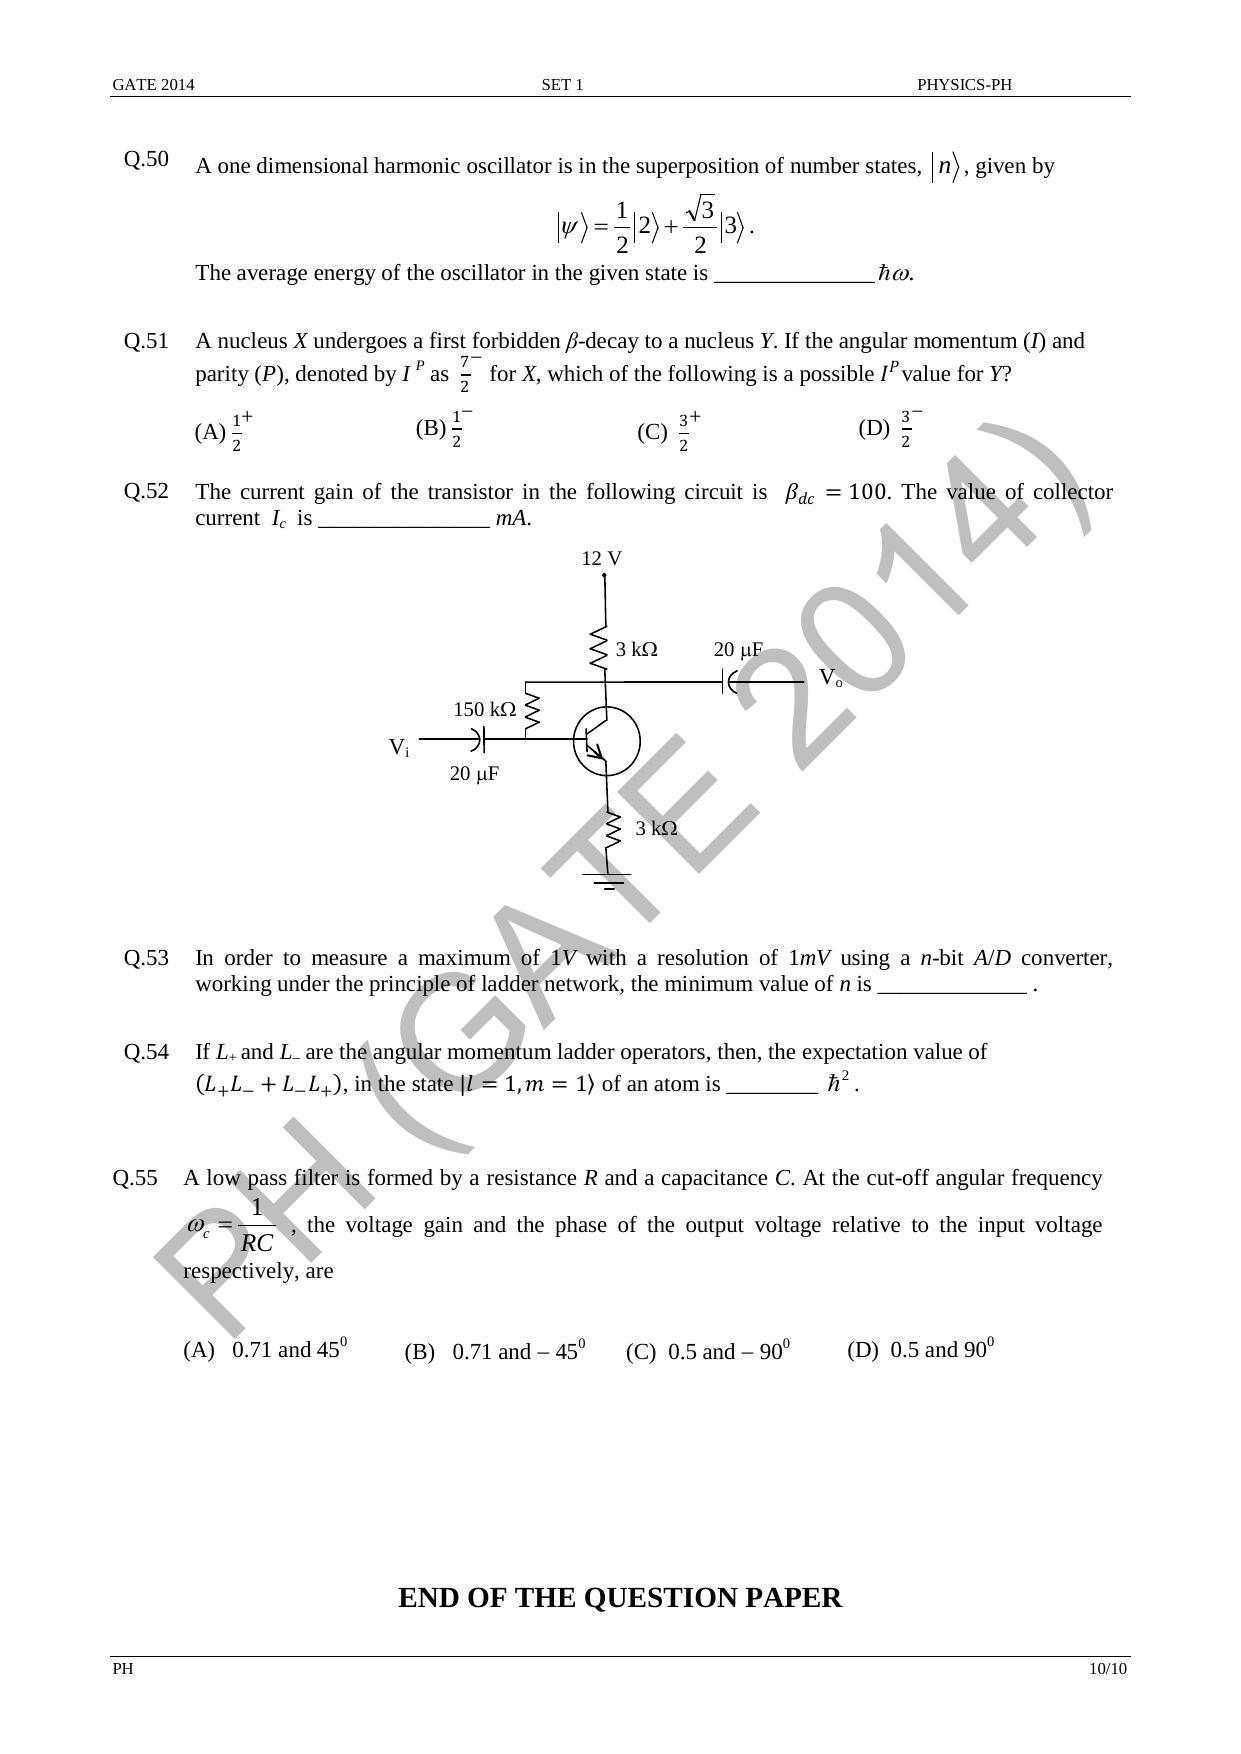 GATE 2014 Physics (PH) Question Paper with Answer Key - Page 17